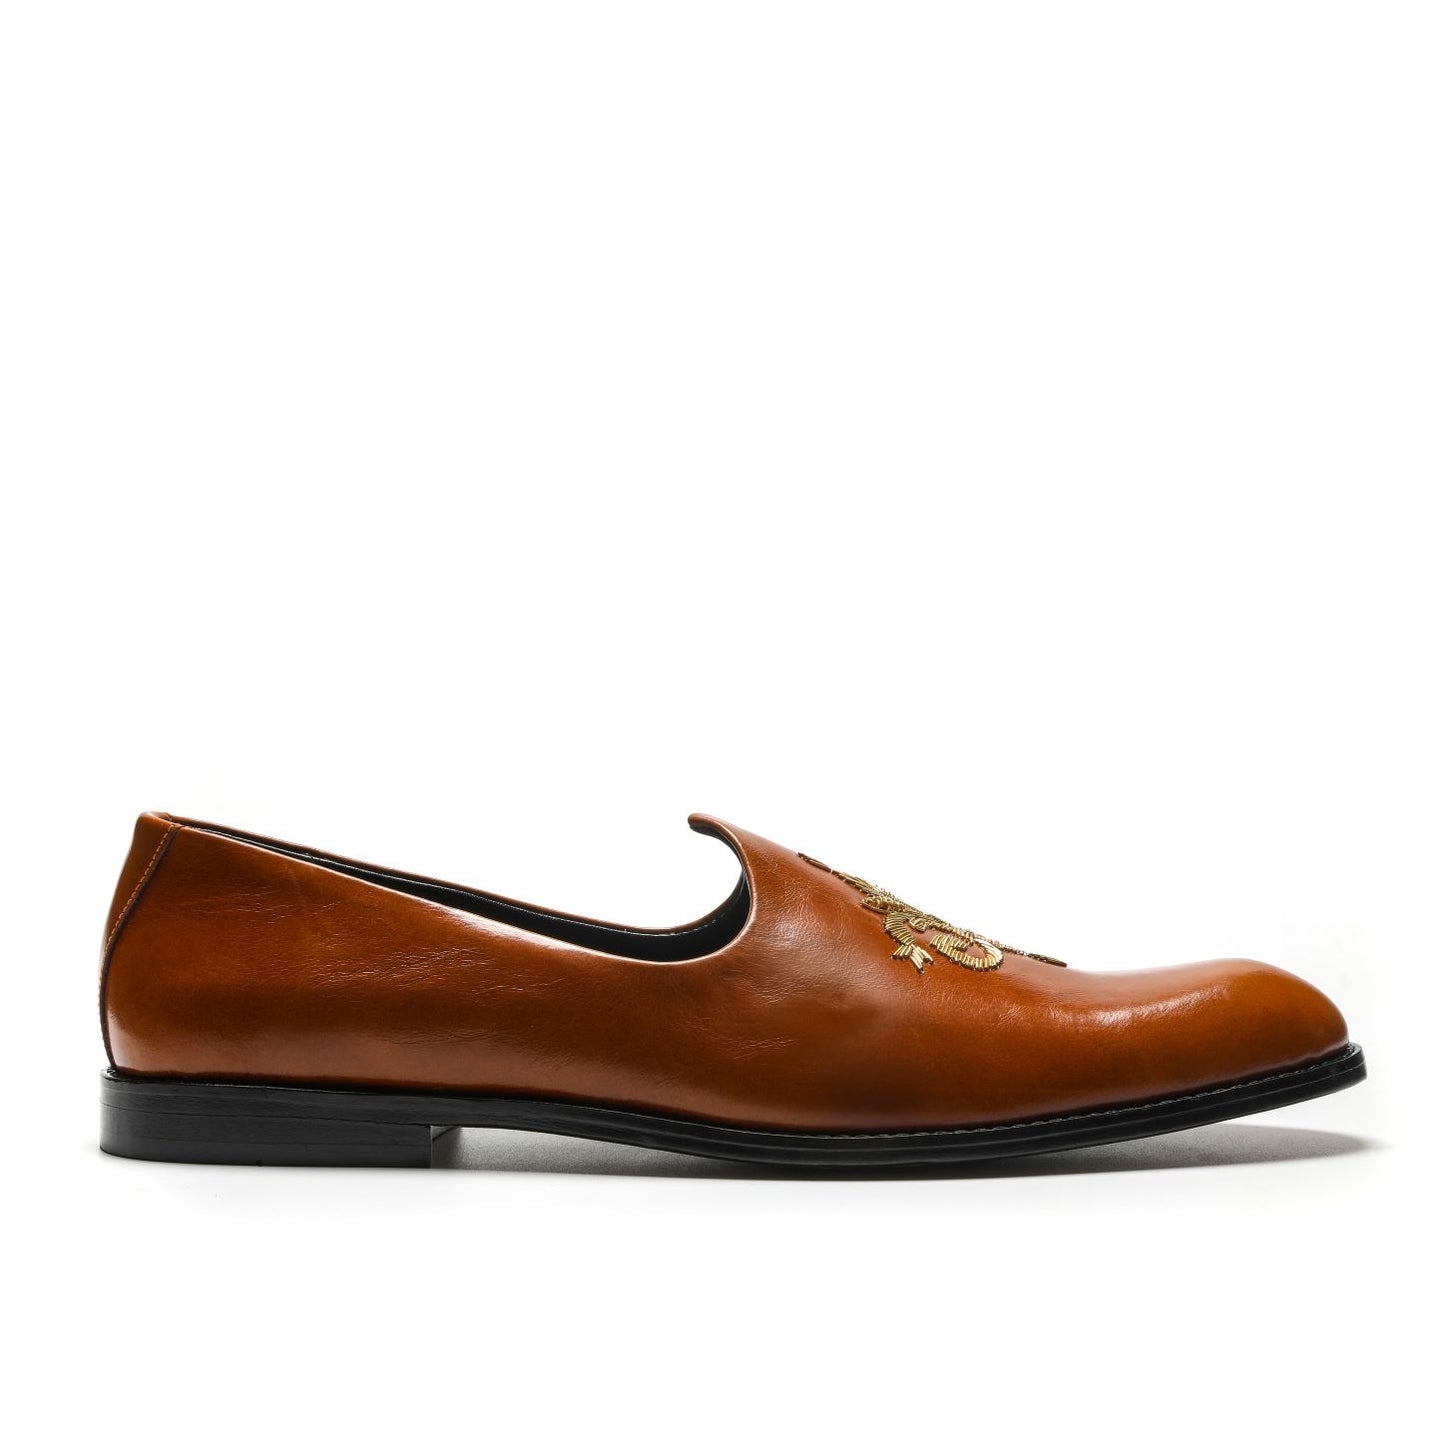 Burnt Tan Leather Loafers